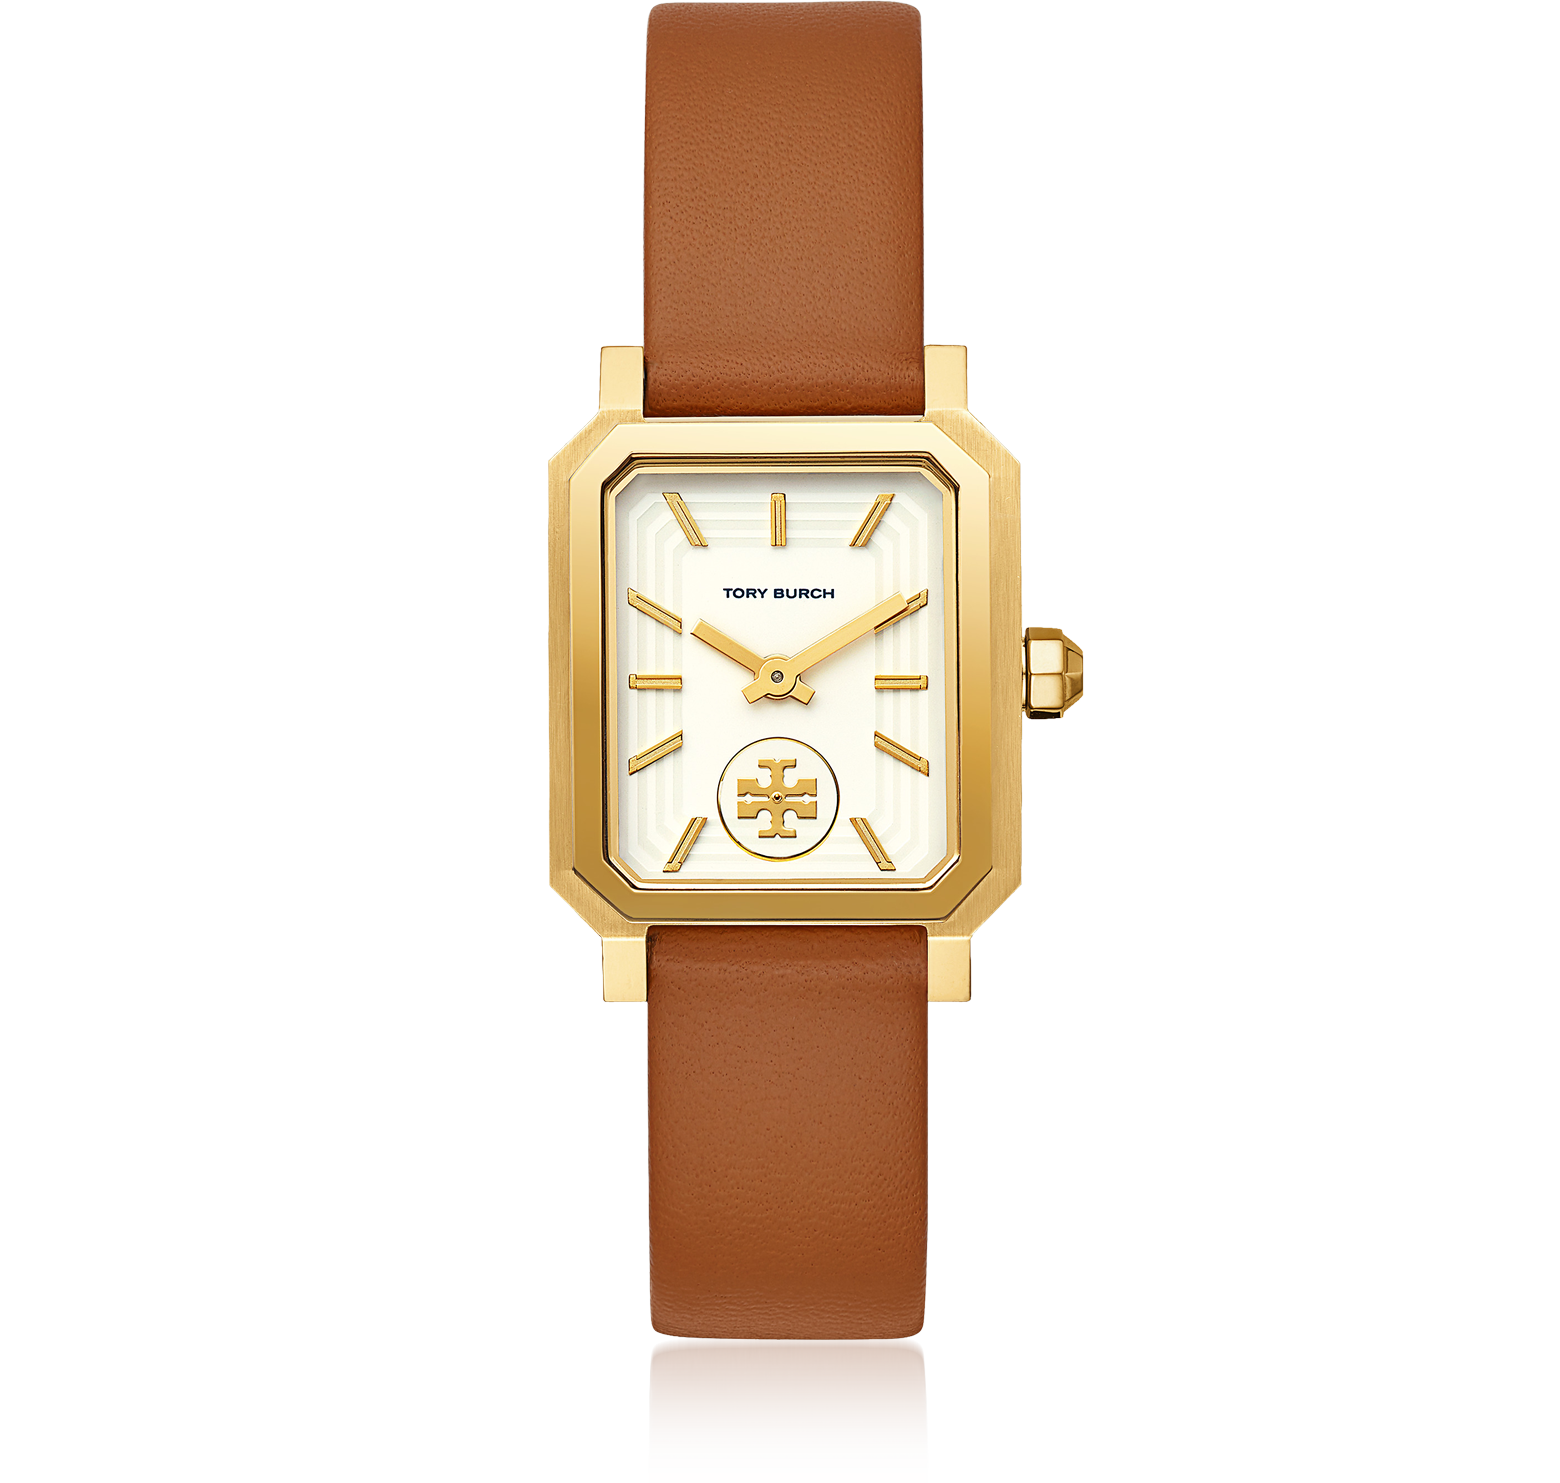 Tory Burch The Reva Stainless Steel Women's Watch at FORZIERI